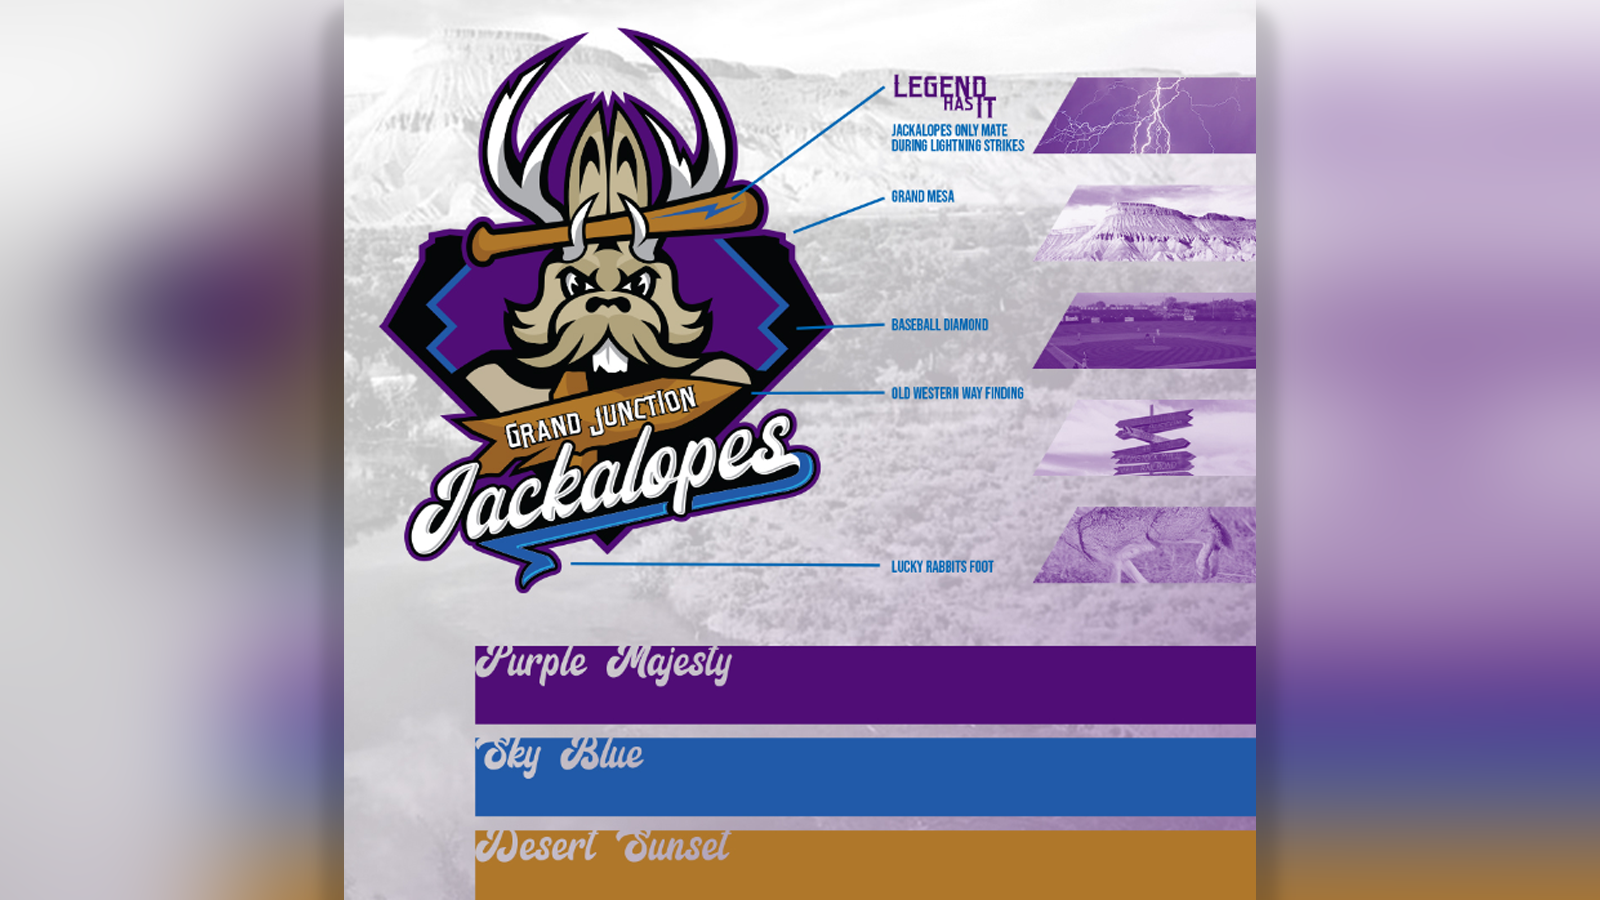 Grand Junction Rockies Minor League Baseball Fan Apparel and Souvenirs for  sale